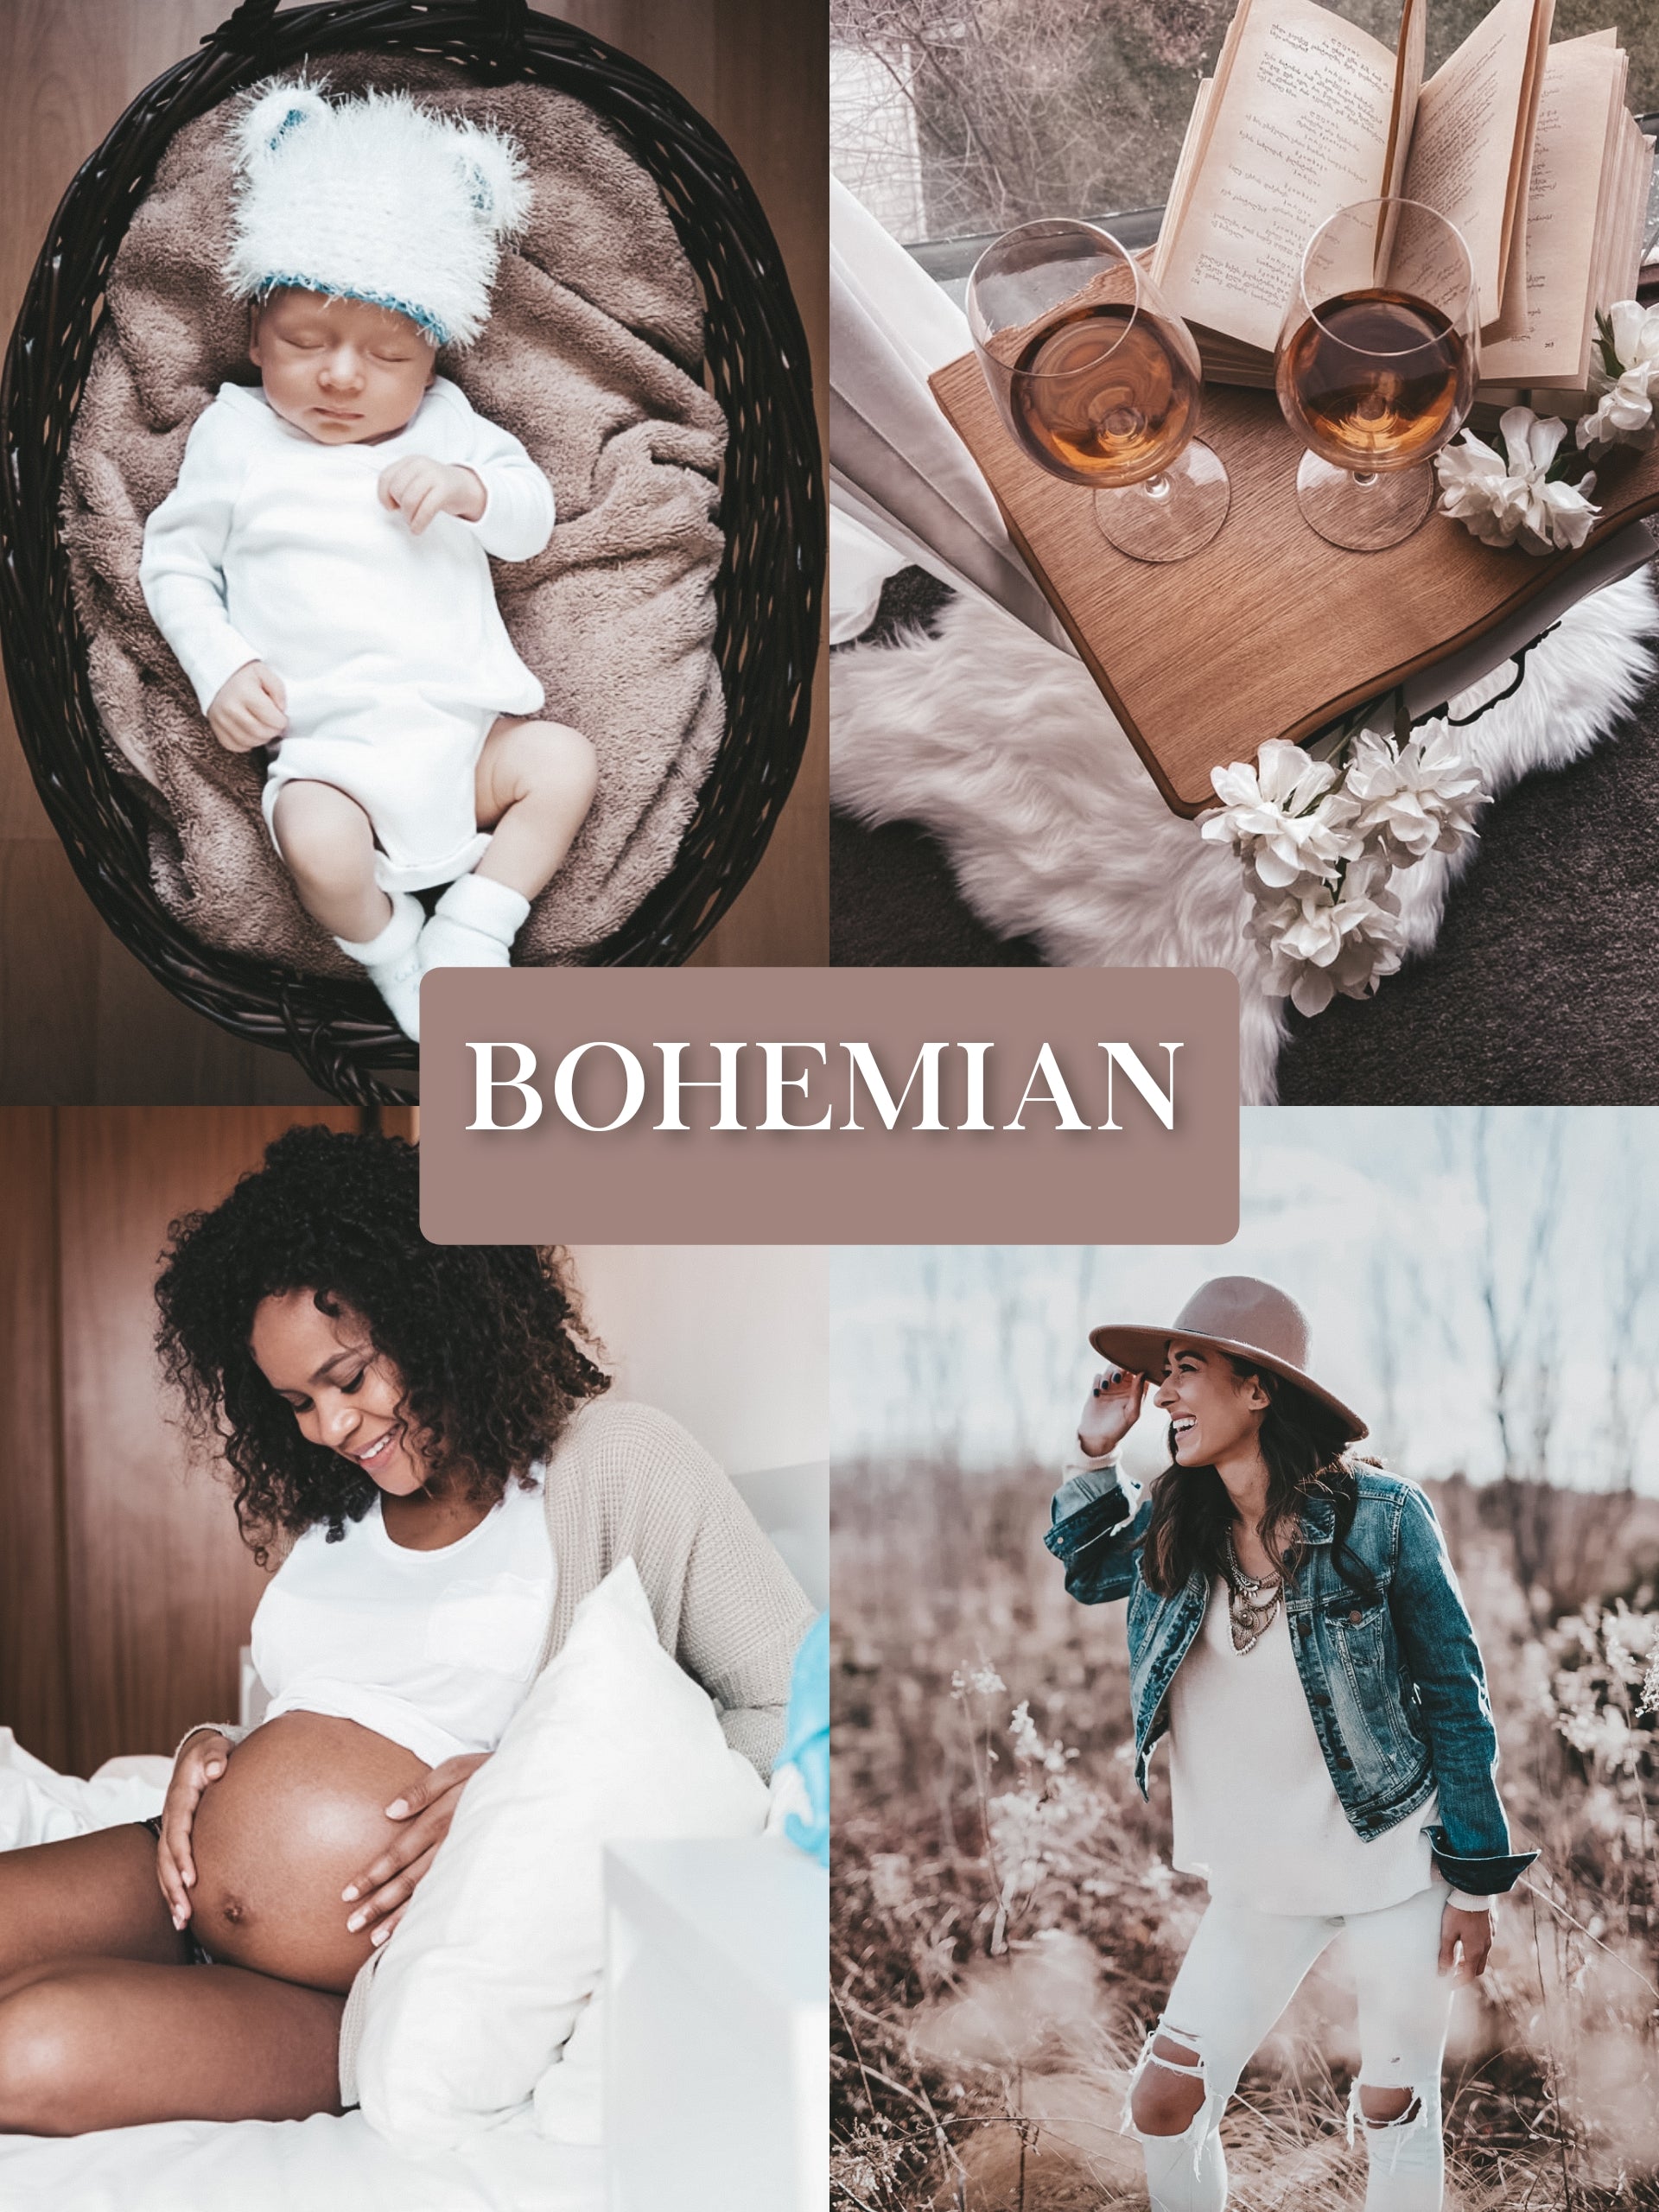 Bohemian - One Click Filter